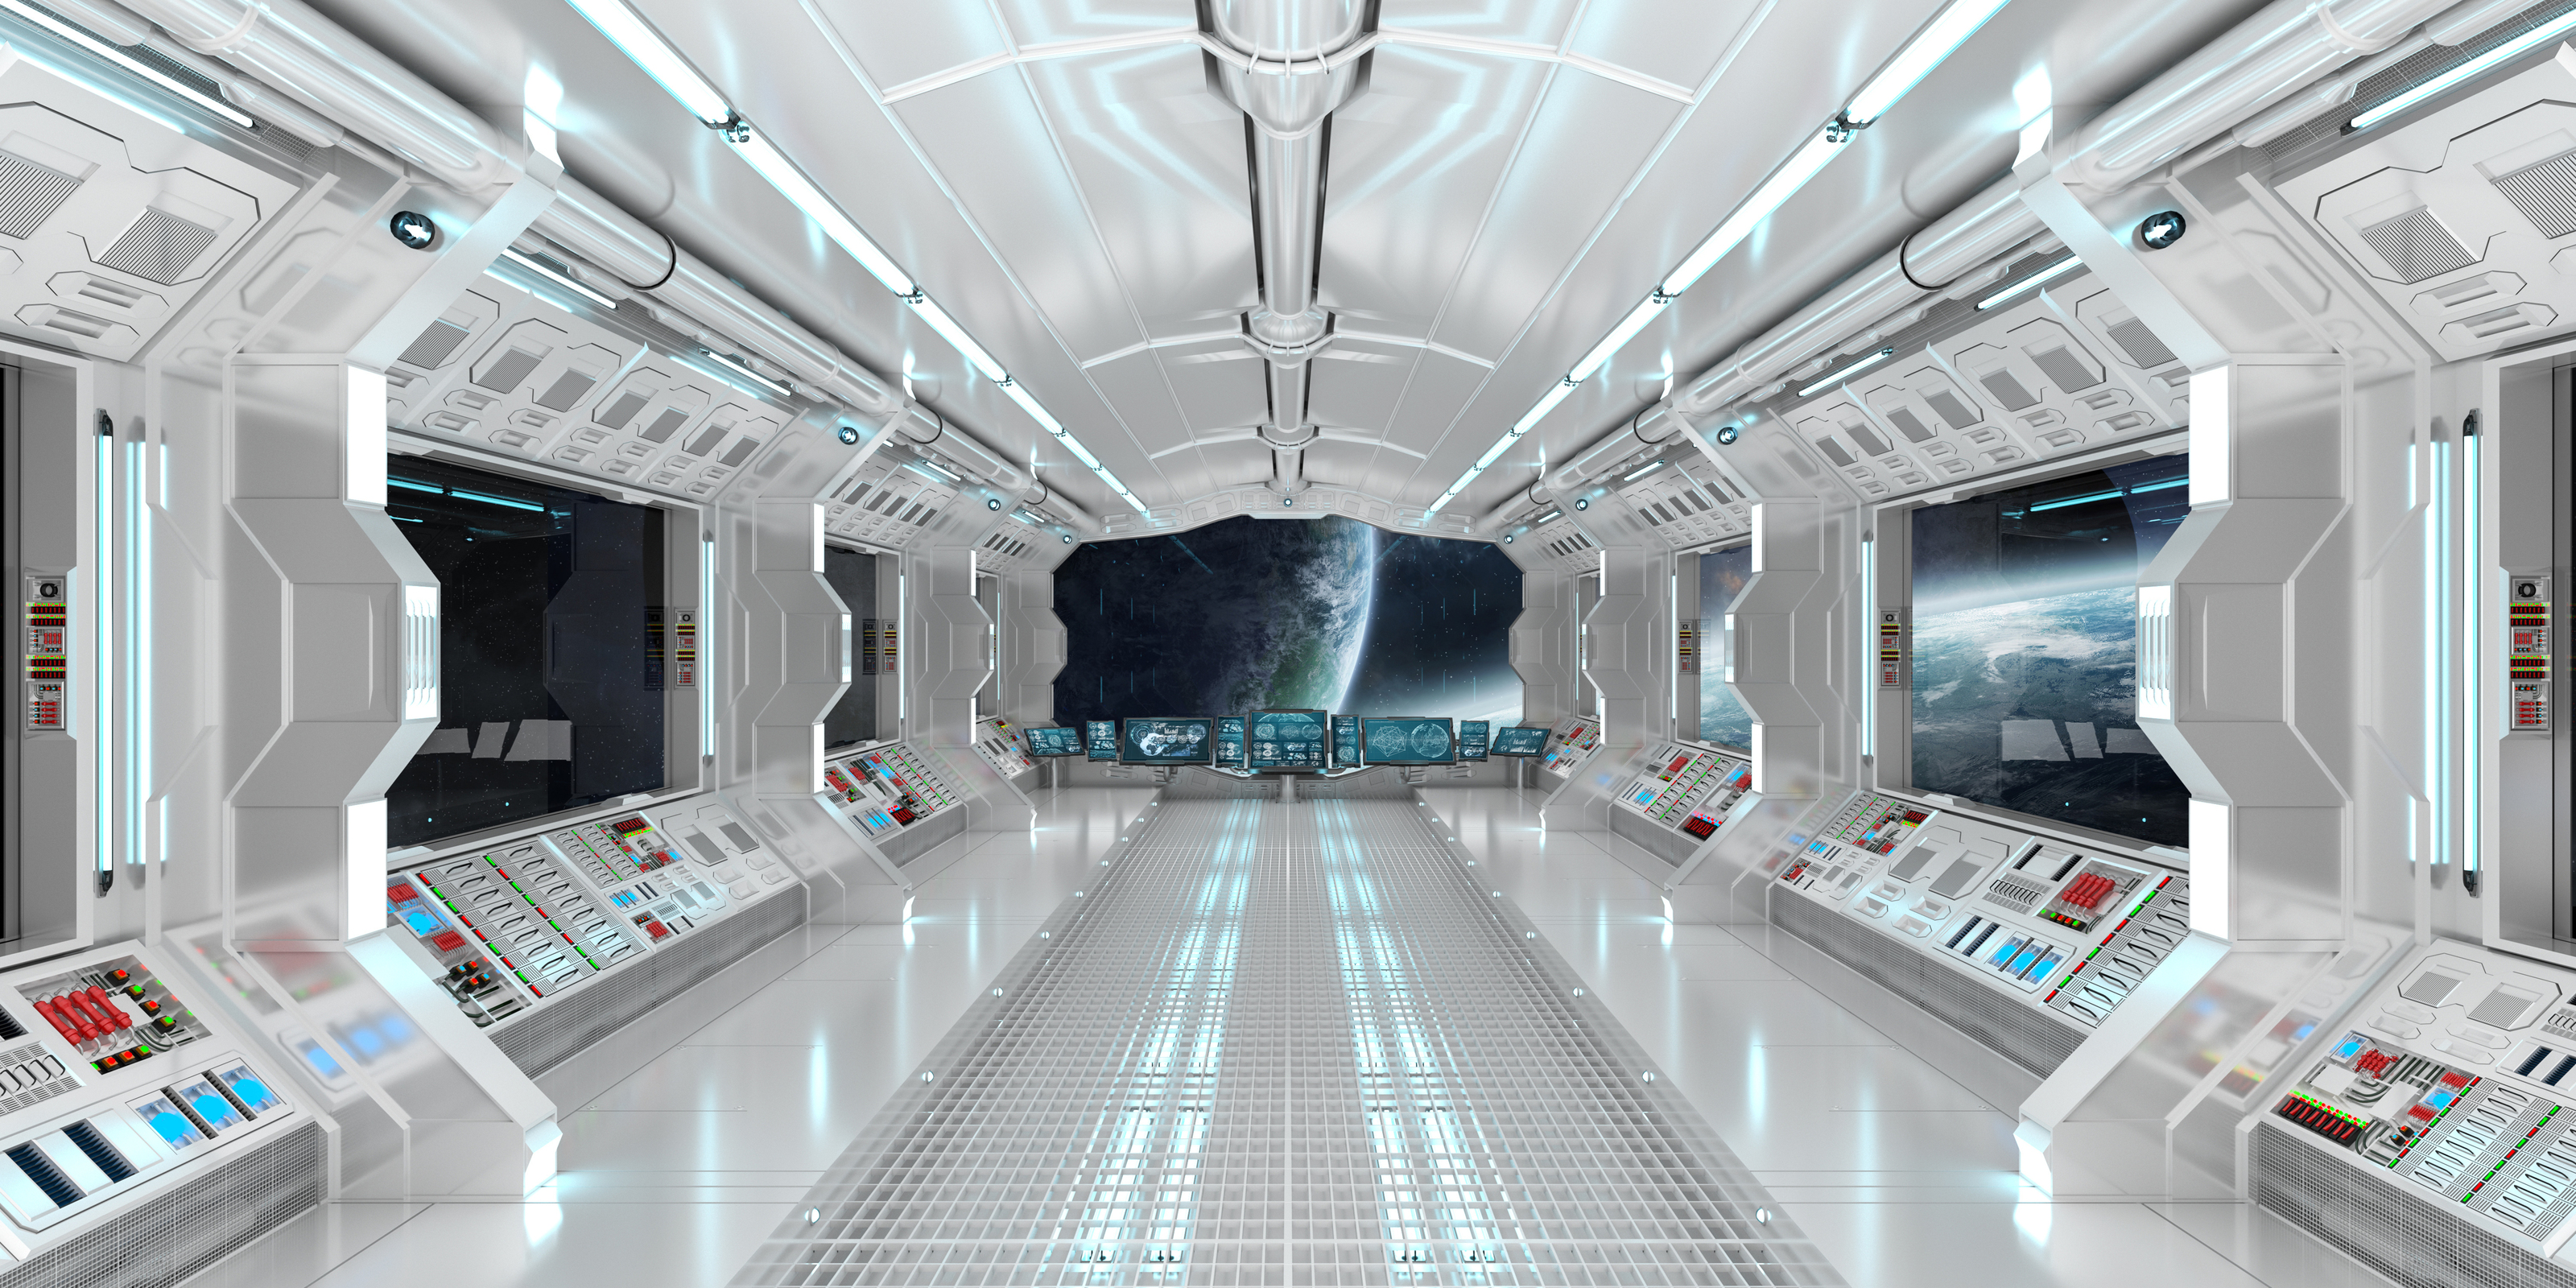 View From Inside Space Ship Wall Mural - Murals Your Way